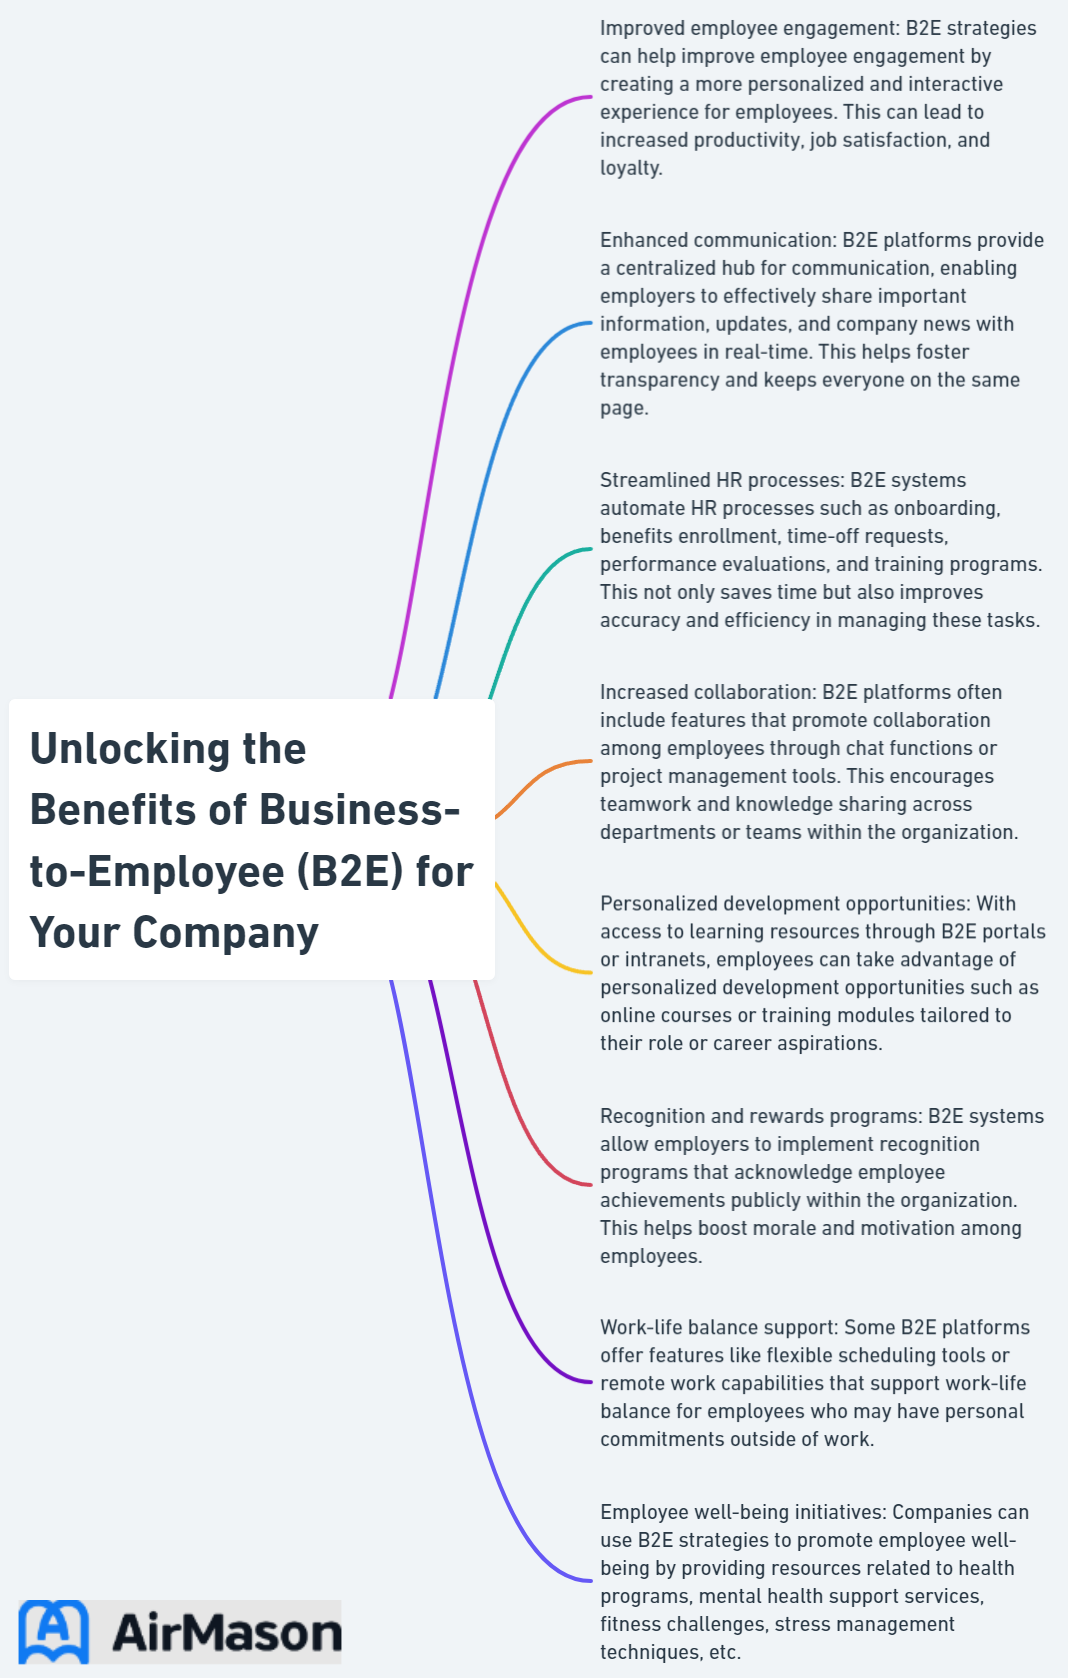 Unlocking the Benefits of Business-to-Employee (B2E) for Your Company